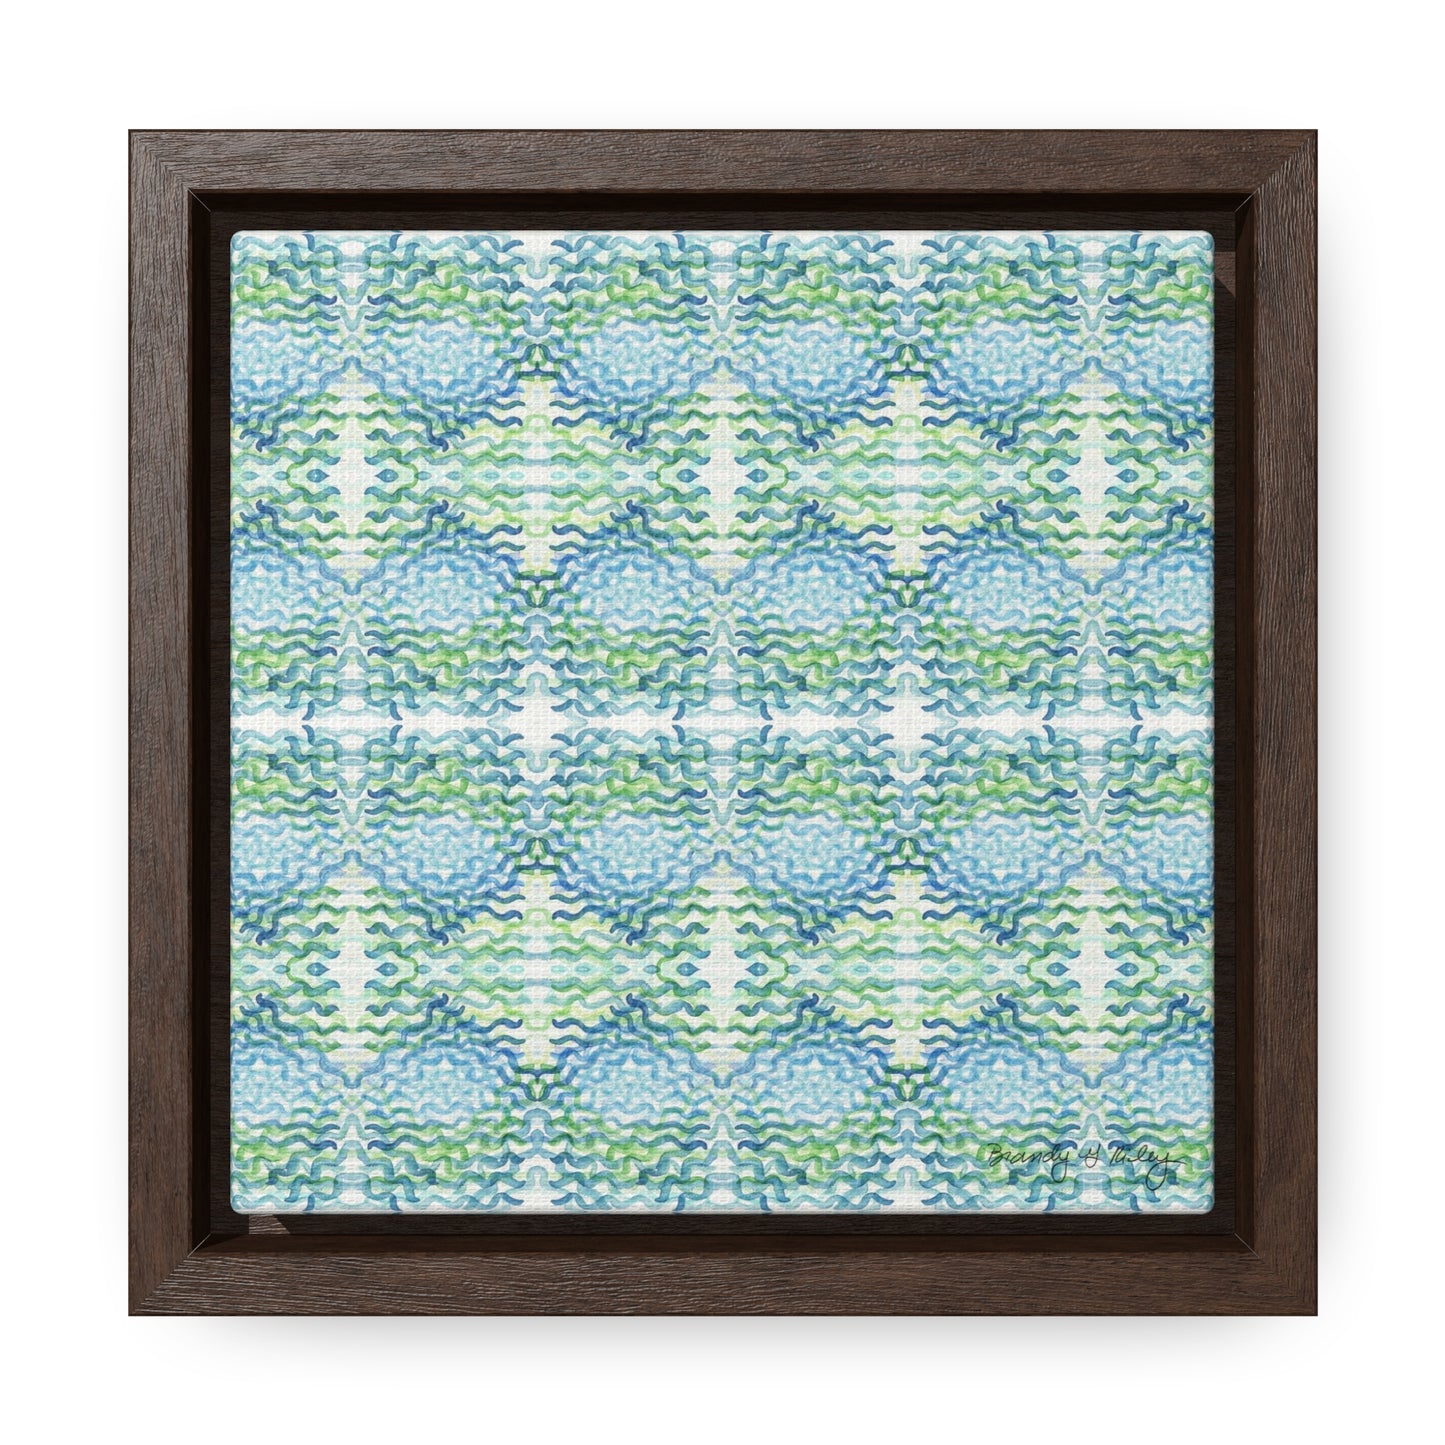 Stretched canvas featuring a blue and green abstract pattern in a brown float frame